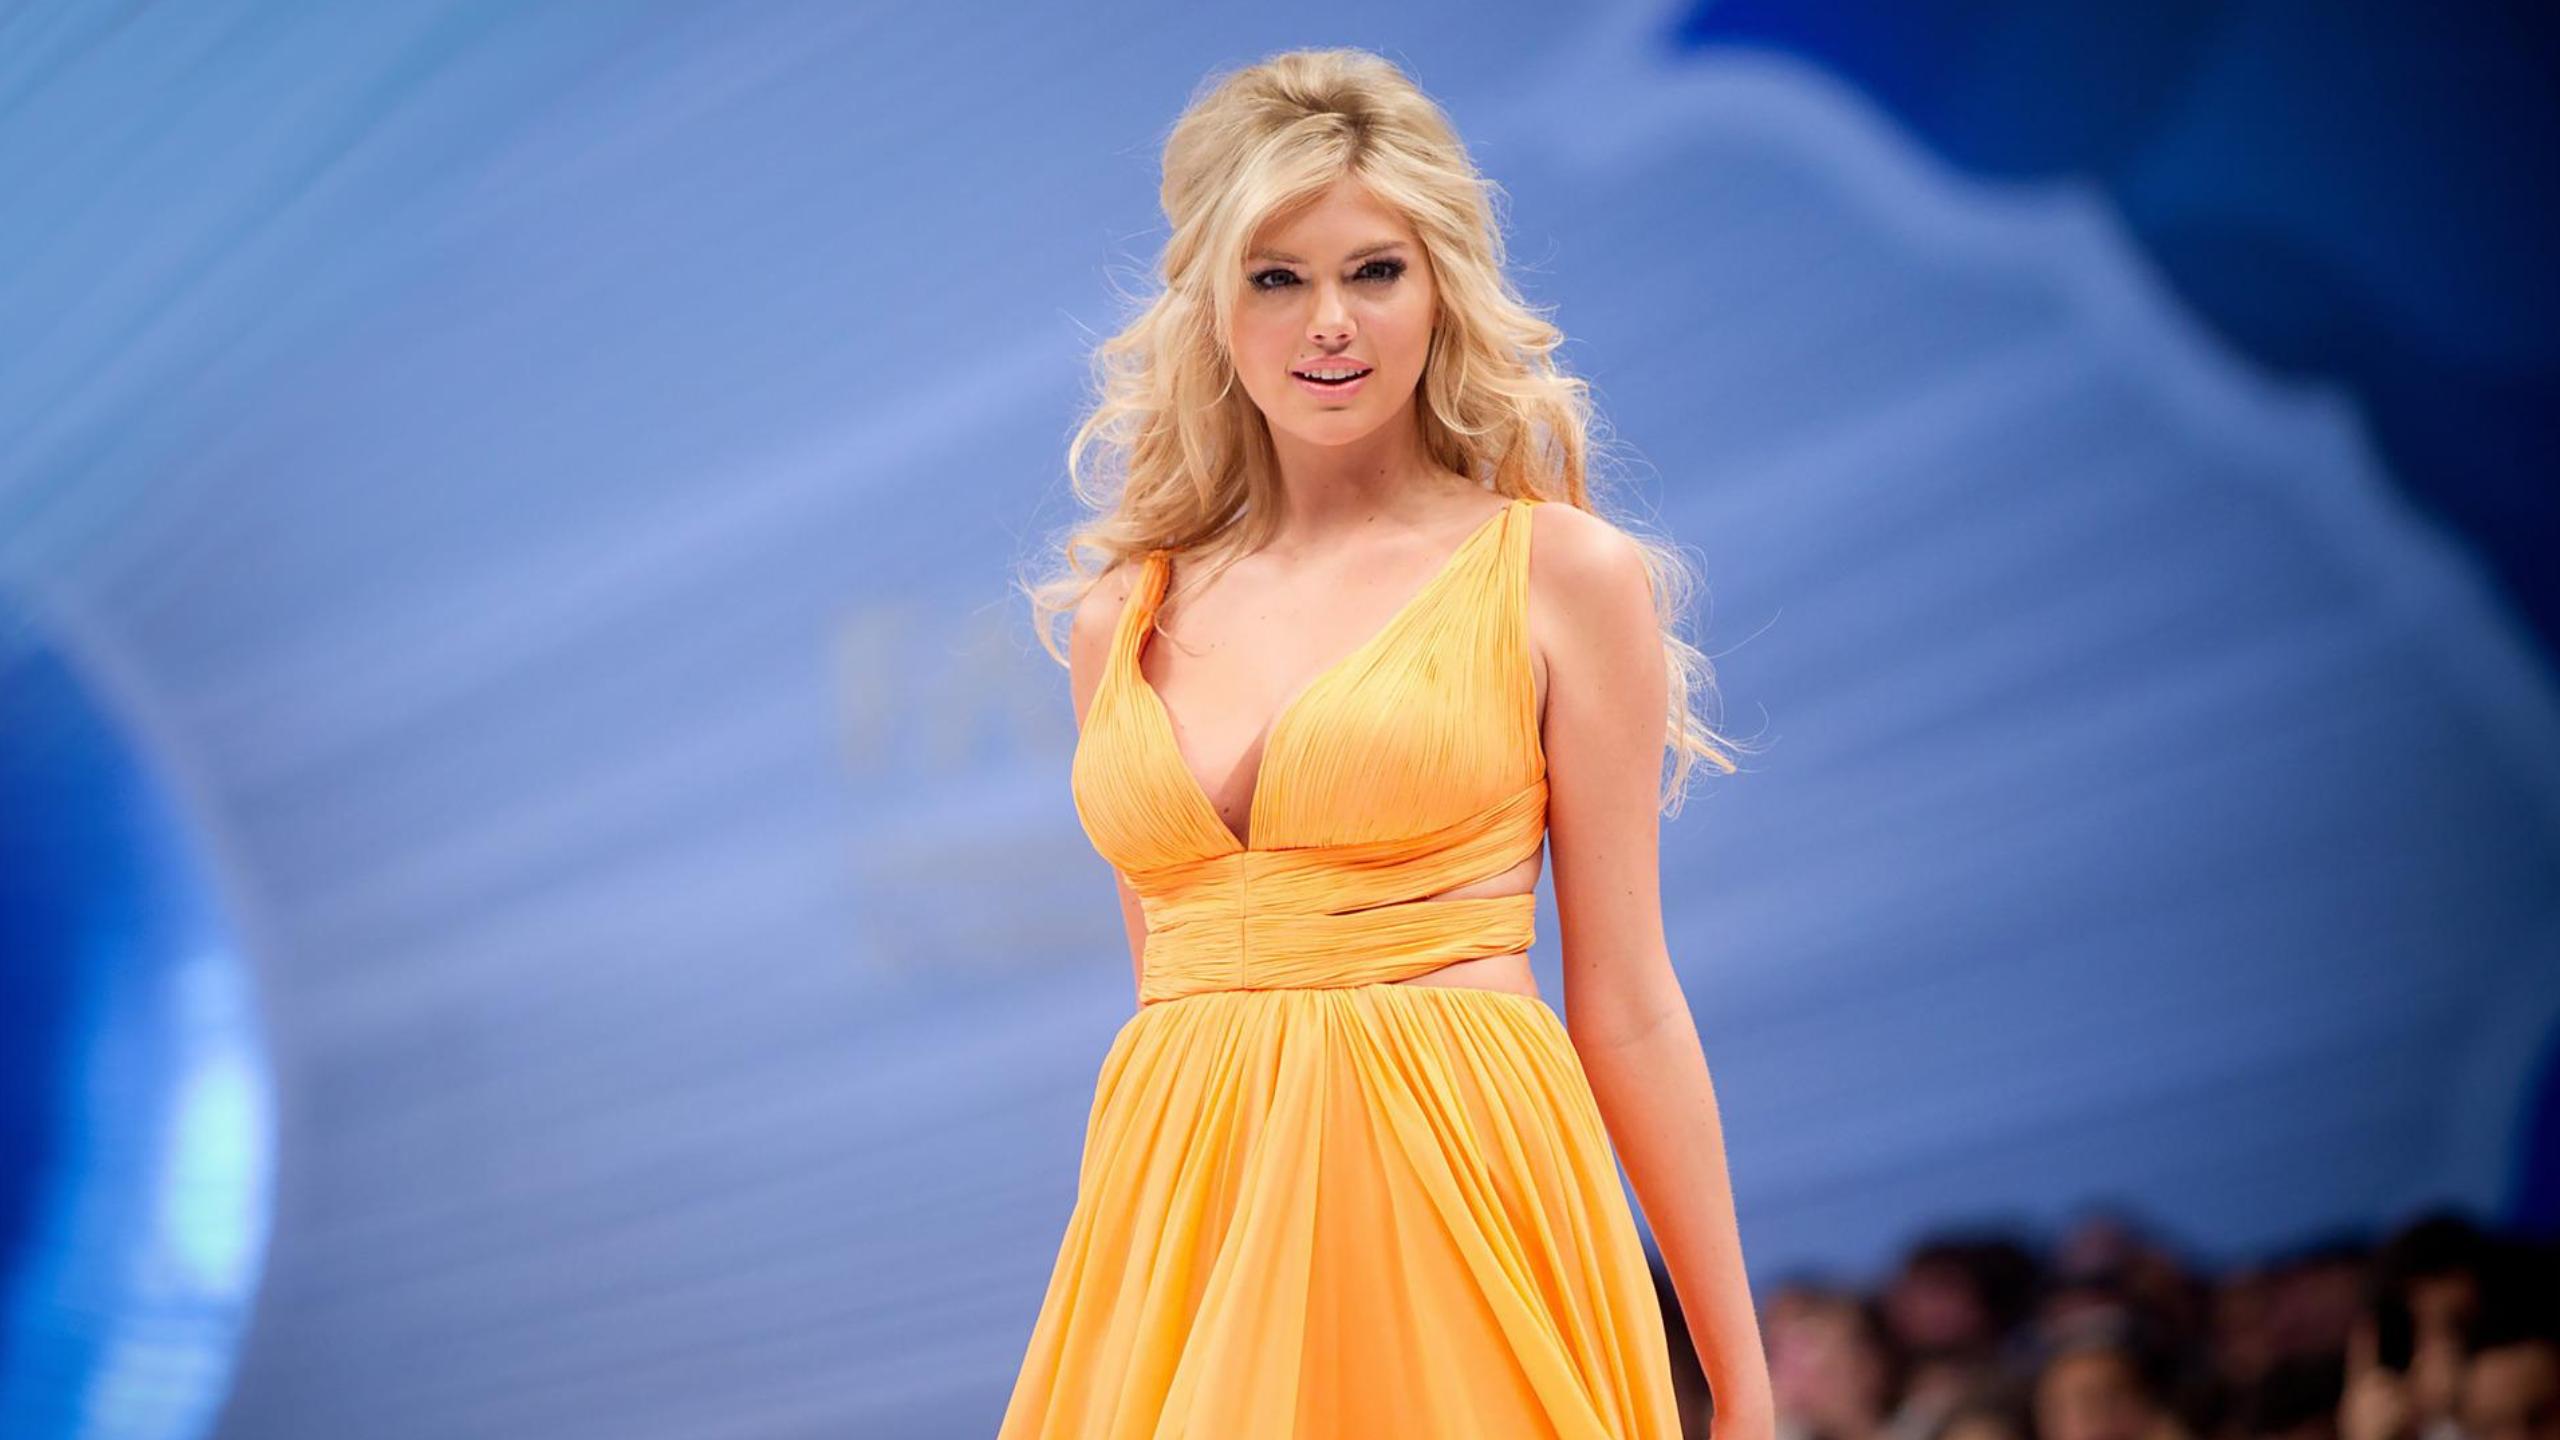 Kate Upton American Model And Actress Wallpaper